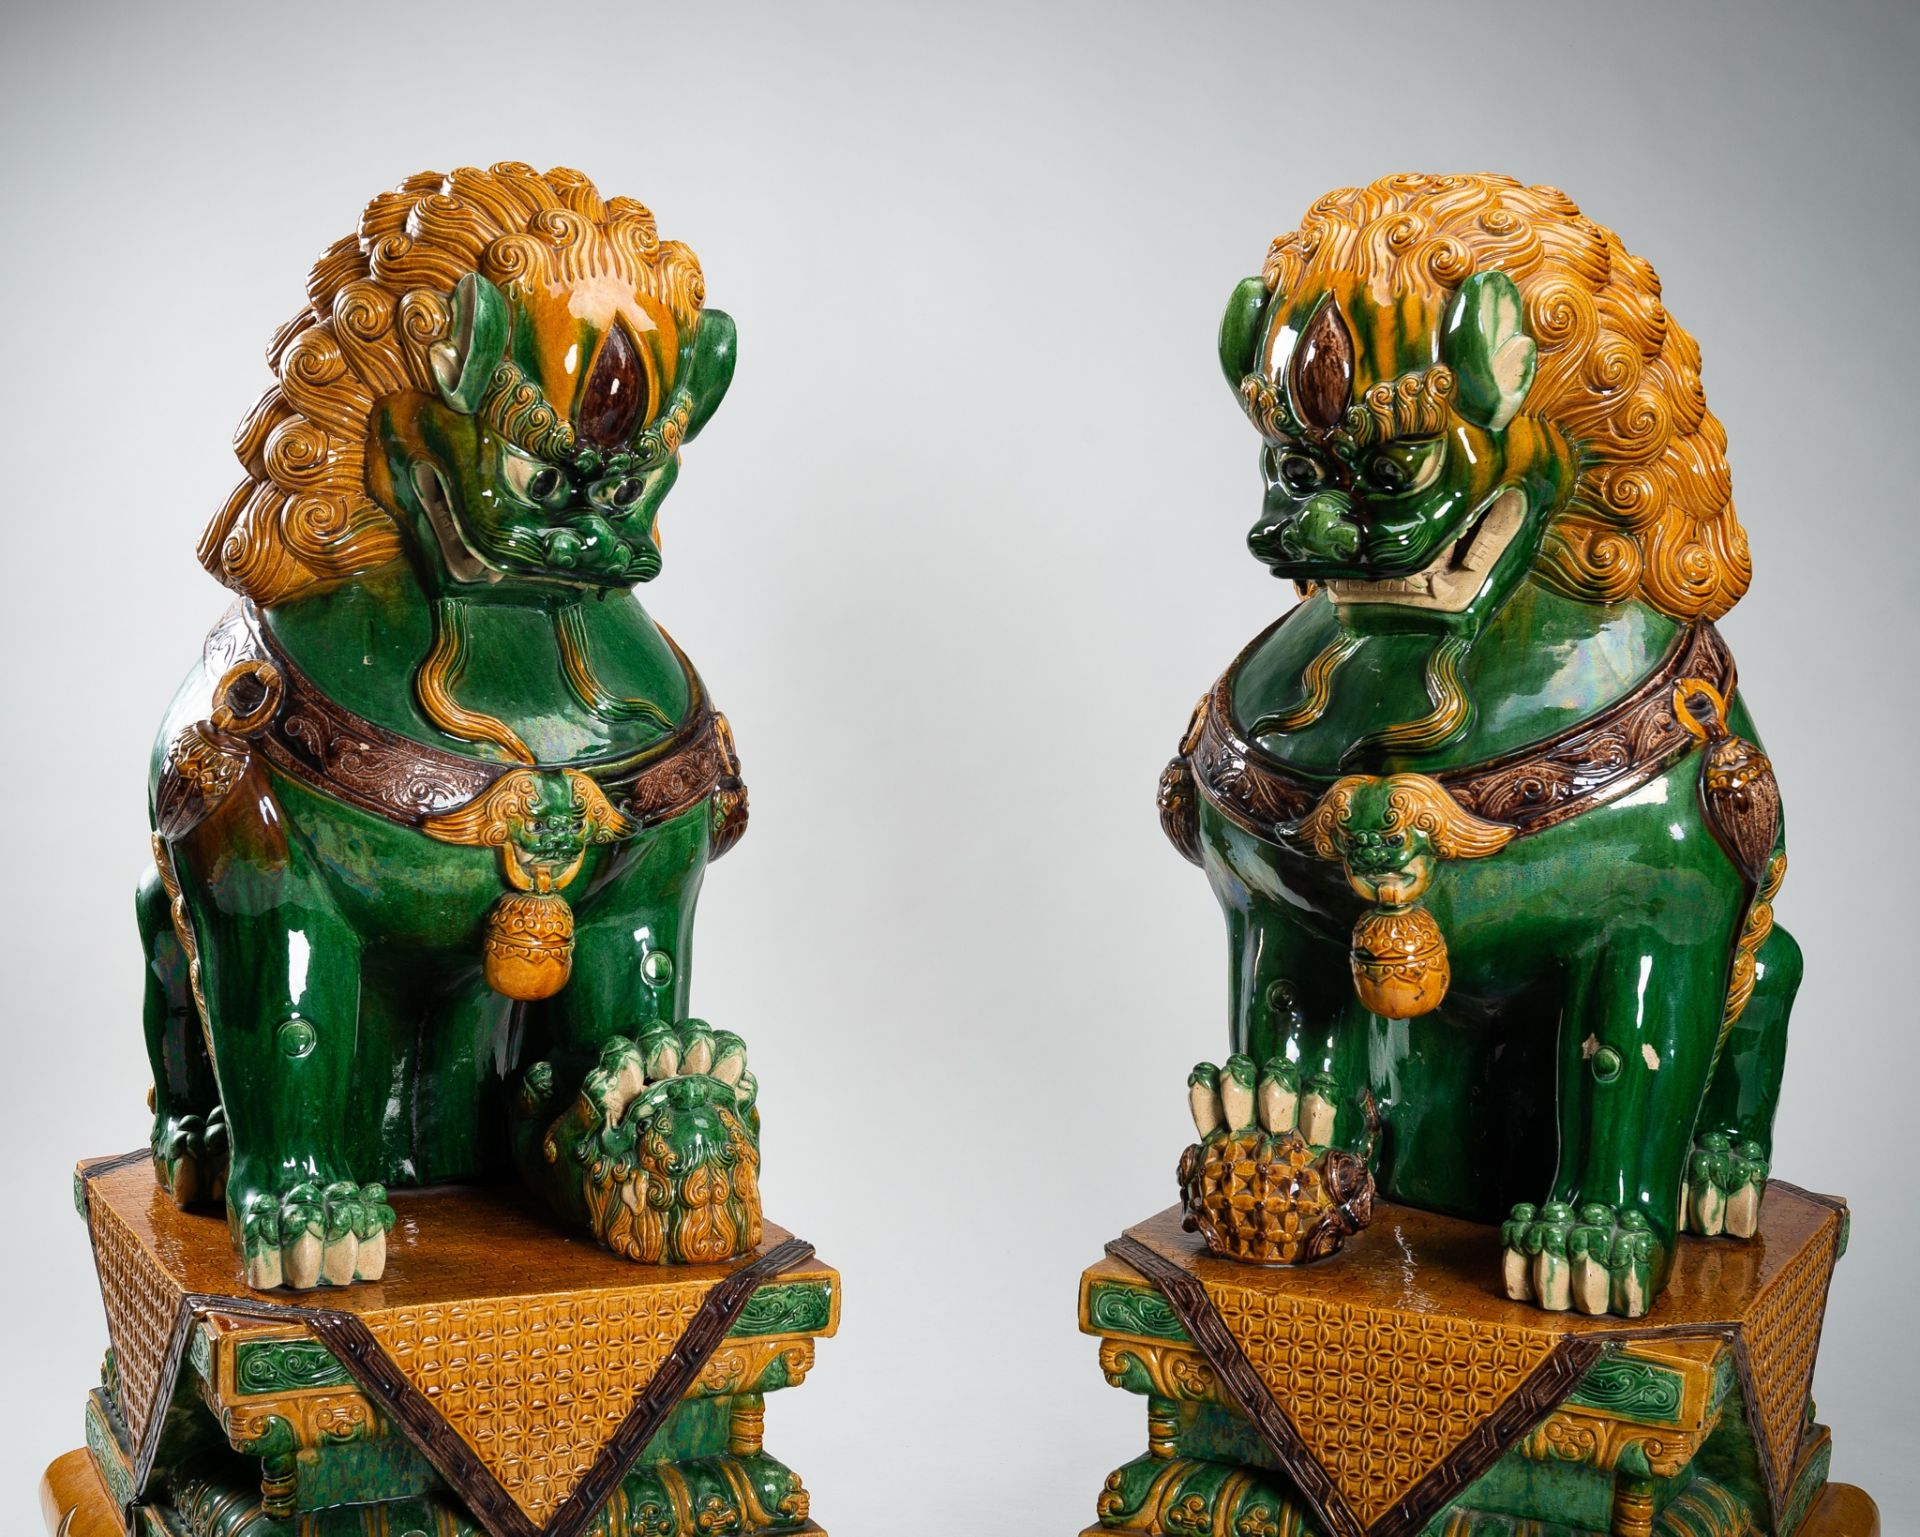 A VERY LARGE SANCAI-GLAZED PAIR OF BUDDHIST LIONS, QING